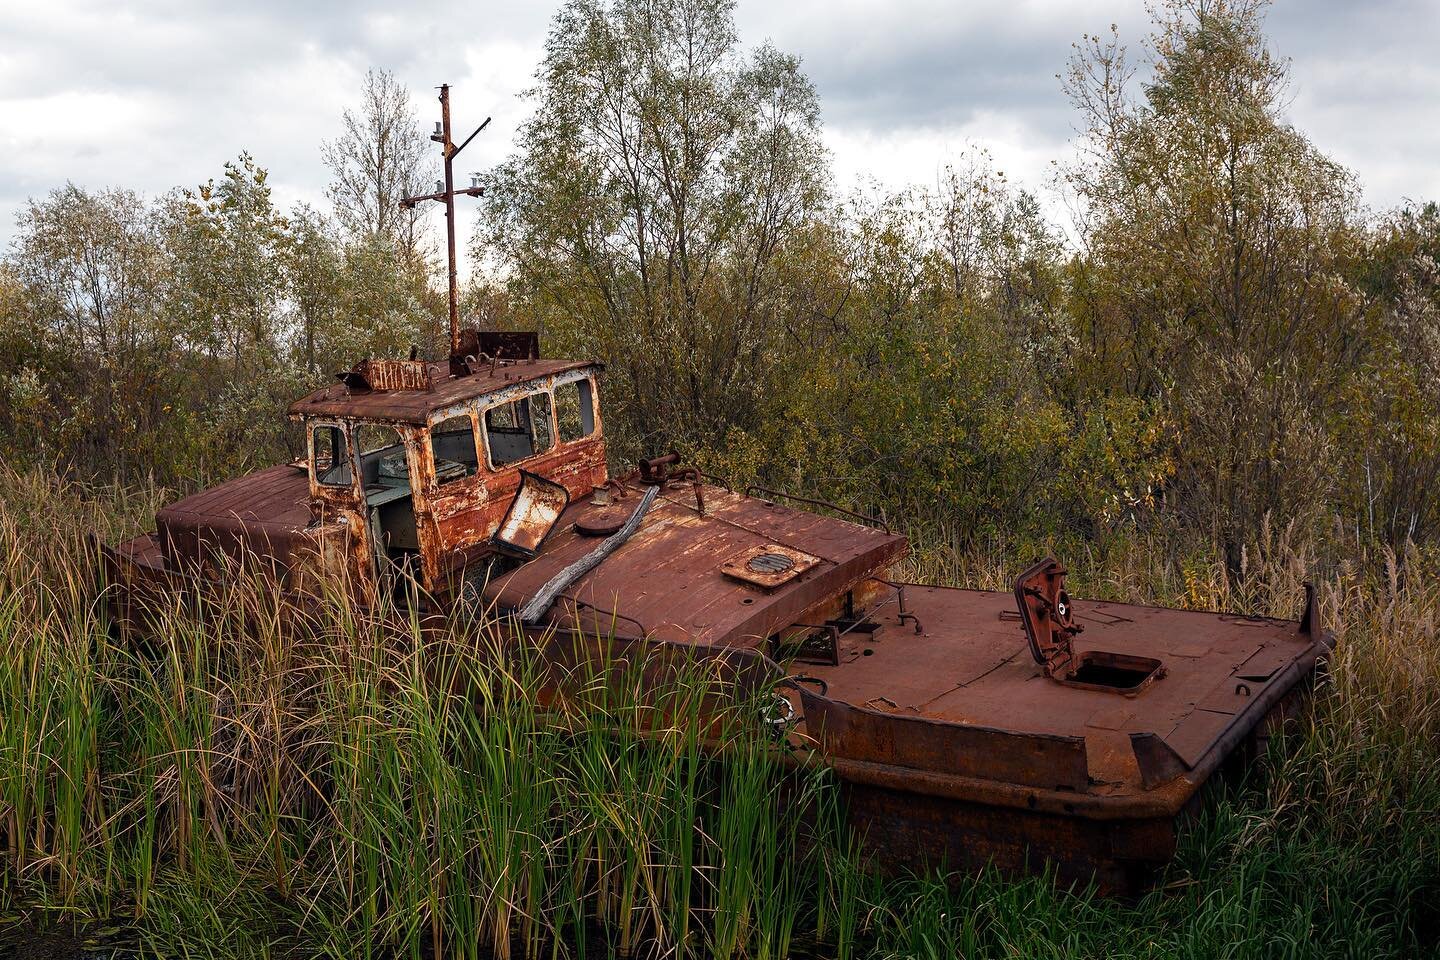 One of several boats at the Chernobyl Port.

#chernobylport #chernobyl #chernobylexclusionzone #abandoned #abandonedplaces #urbex #urbexphotography #urbexpeople #chornobyl #abadoned #stocktella #boat #stockphotography #stockphotos